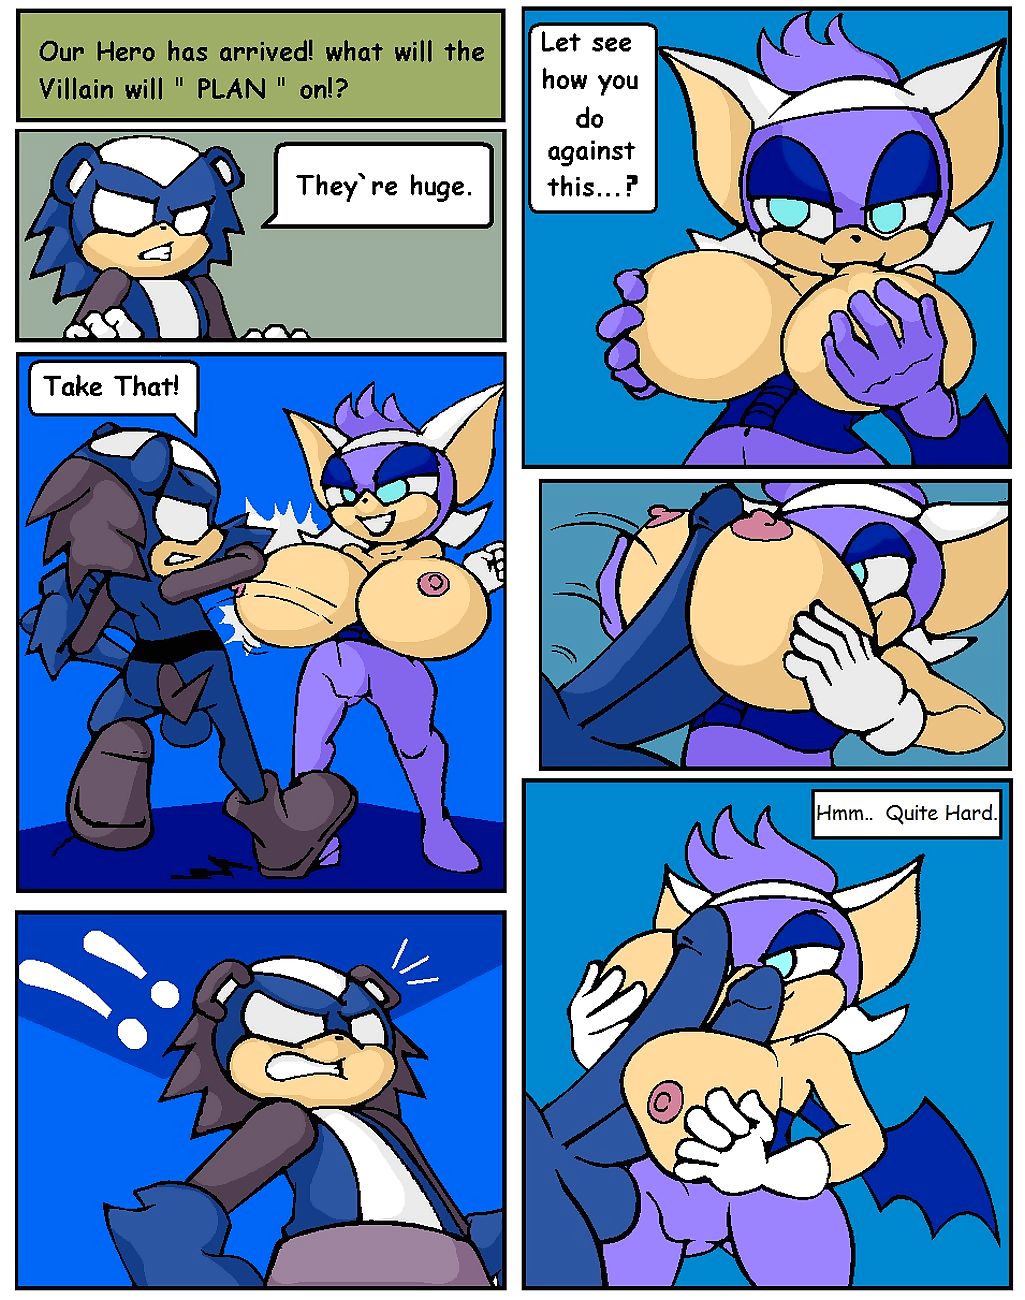 Capt Two-Dick page 1